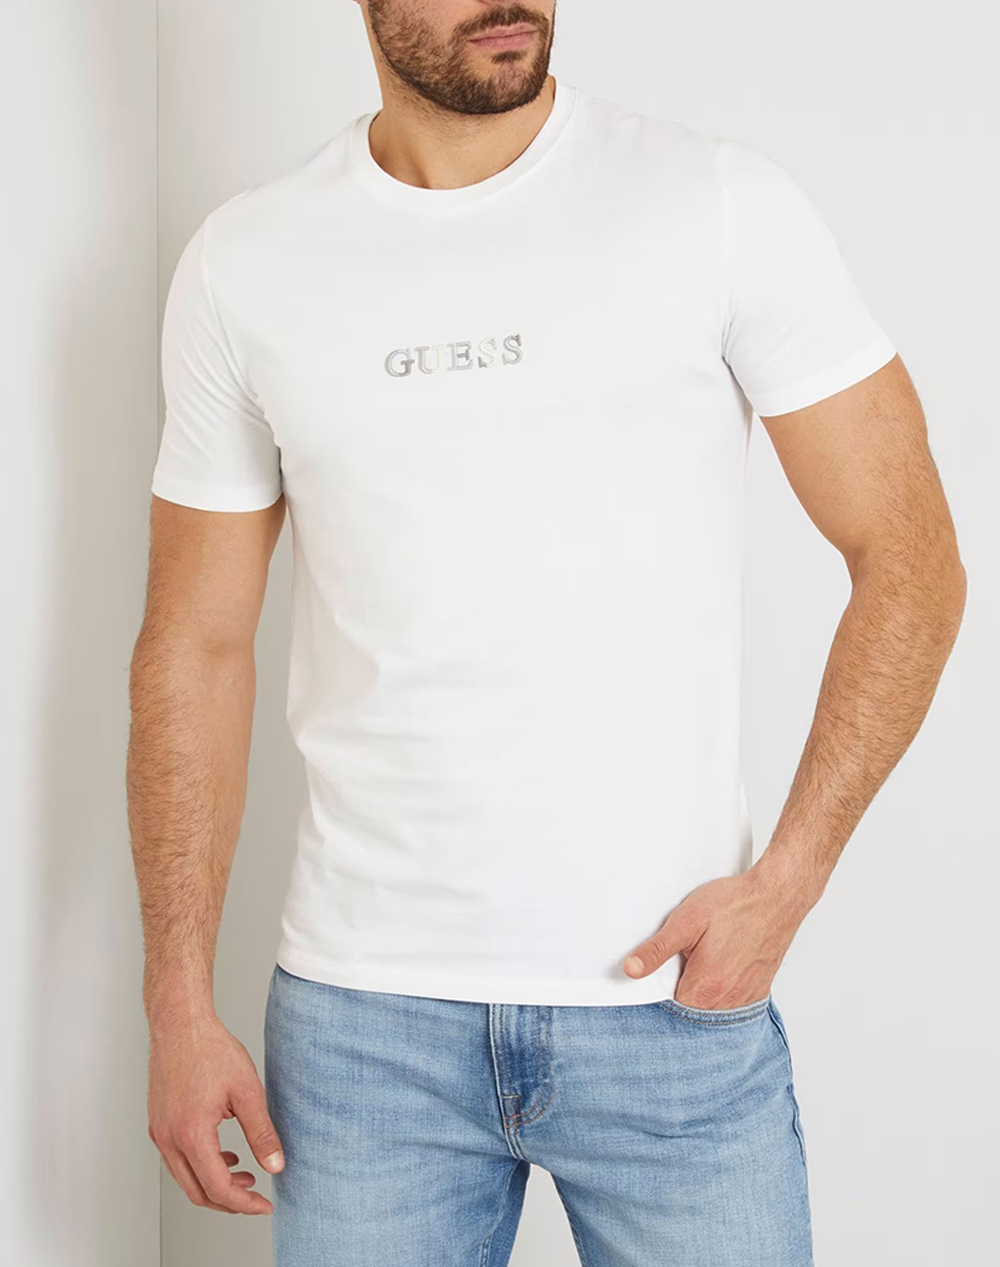 GUESS SS CN GUESS MULTICOLOR TEE ΜΠΛΟΥΖΑ ΑΝΔΡΙΚΟ M4GI92I3Z14-G011 White 3820AGUES3400074_XR05646